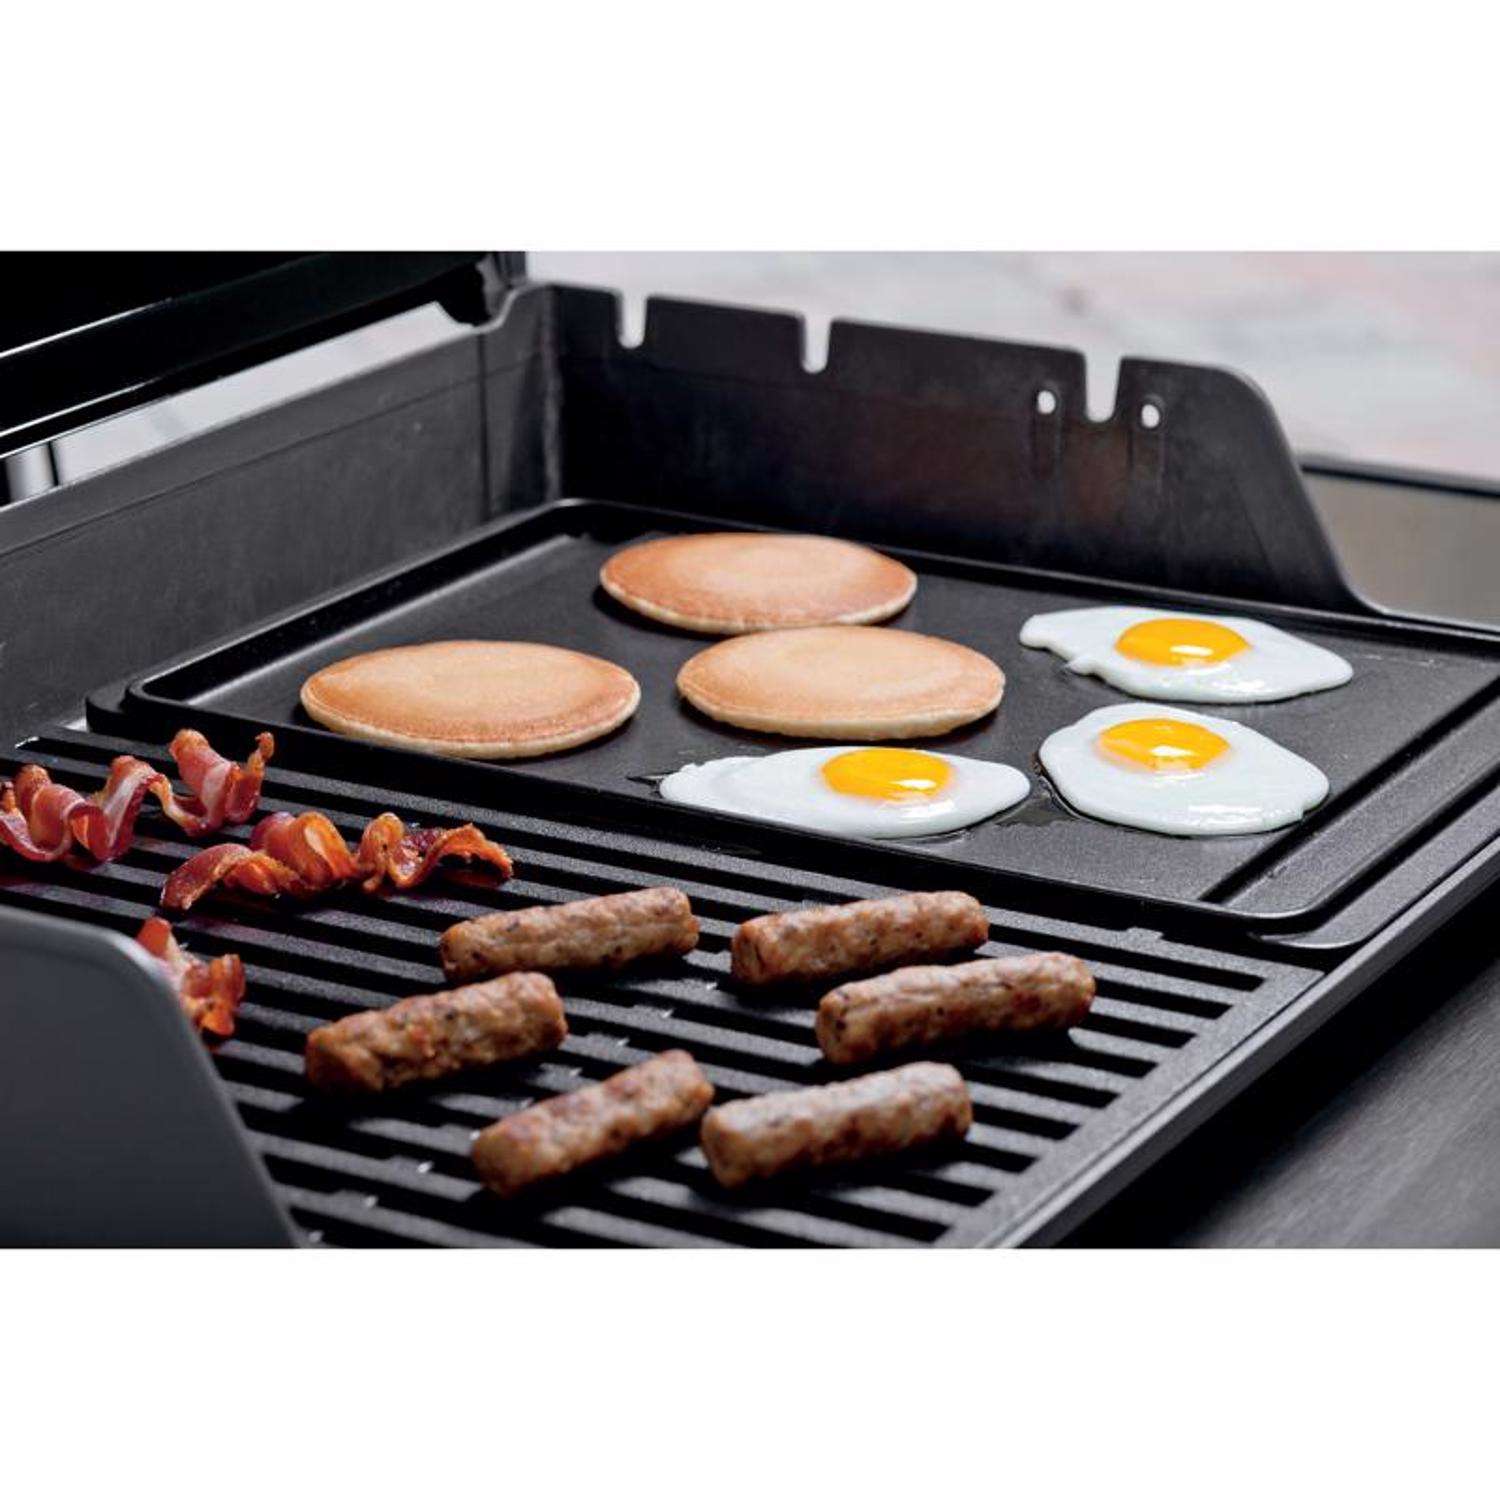 Popular Mechanics Agrees: The PK Grill is One of a Kind - PK Grills